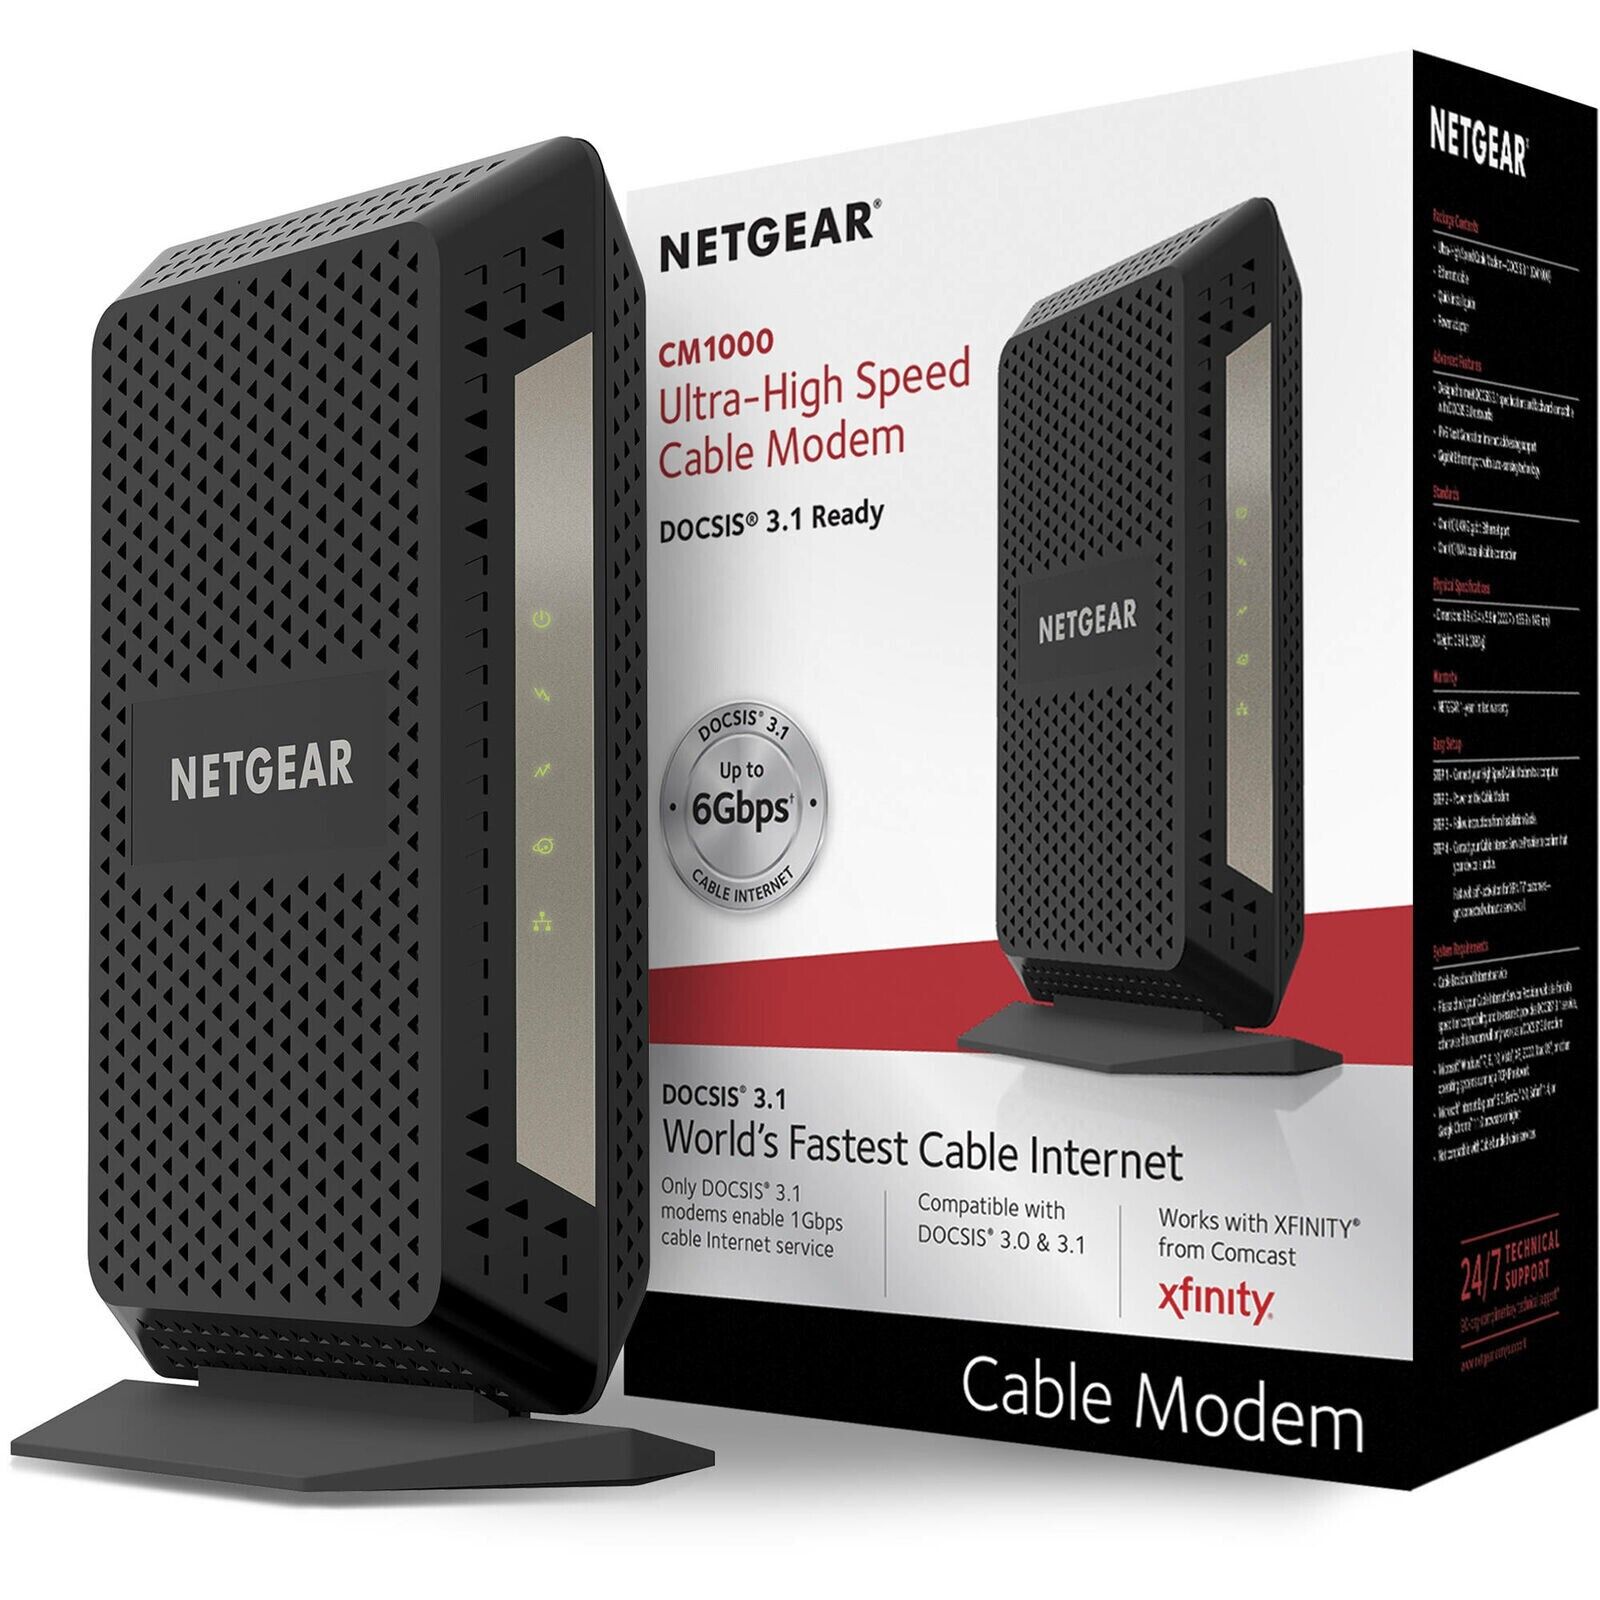 Netgear CM1000 DOCSIS Ultra-High Speed 3.1 Xfinity Compatible Cable Modem